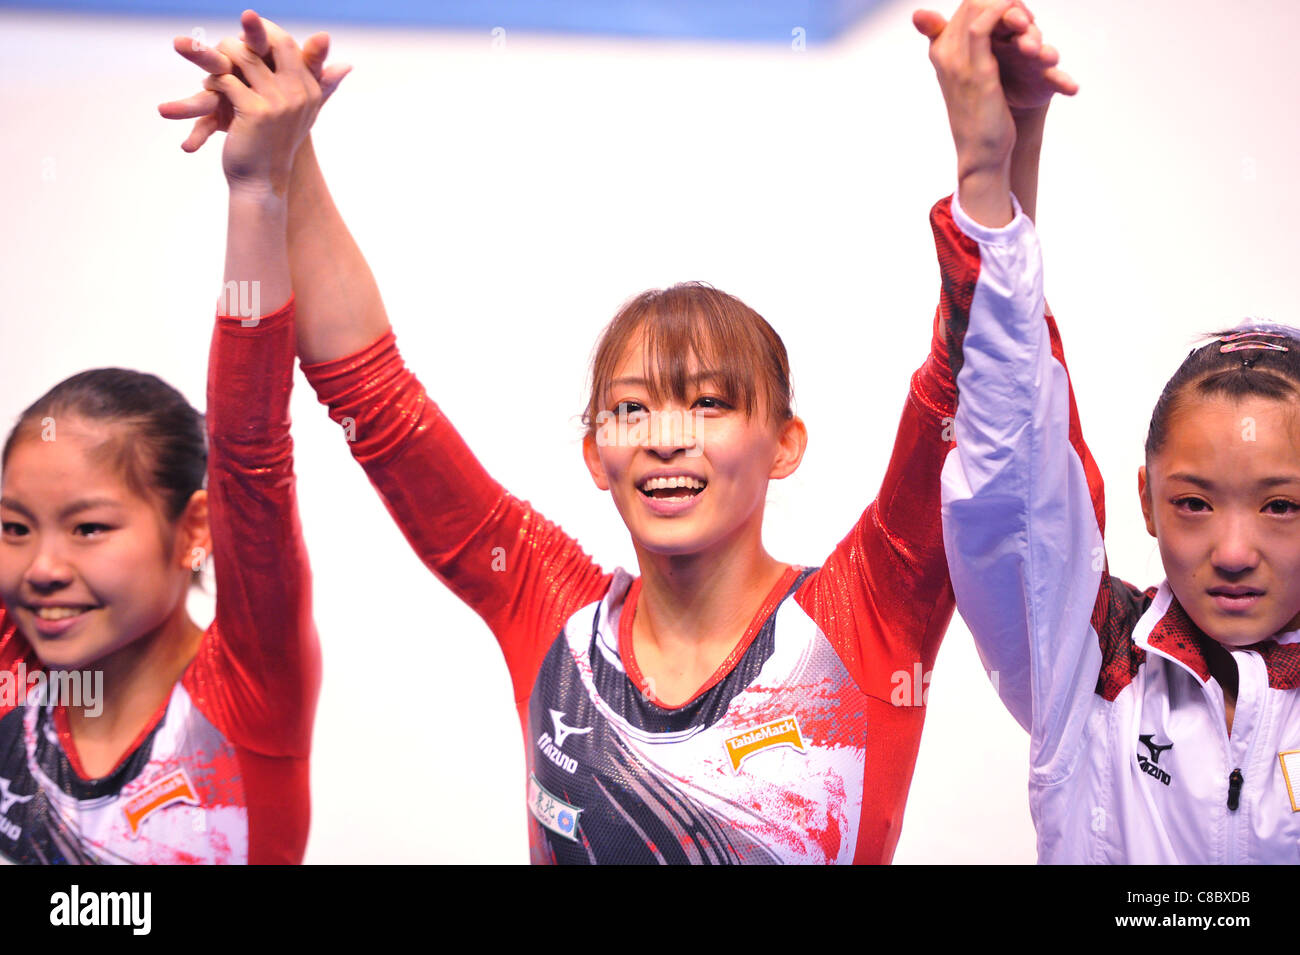 Rie Tanaka (JPN) performs during the FIG World Artistic Gymnastics Championships Tokyo 2011. Stock Photo